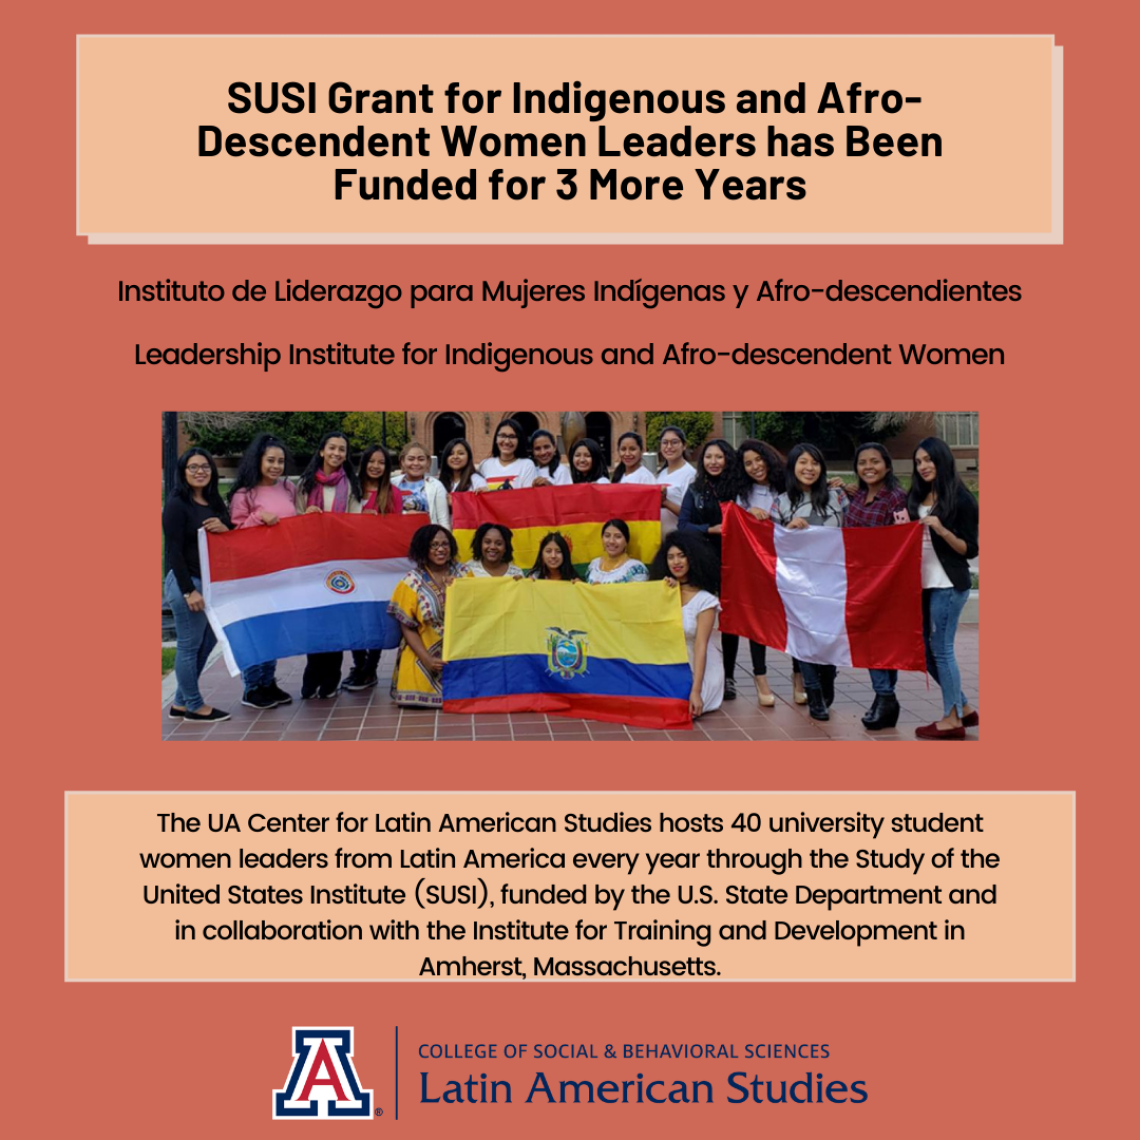 SUSI Grant for Indigenous and AfroDescendent Women Leaders has Been